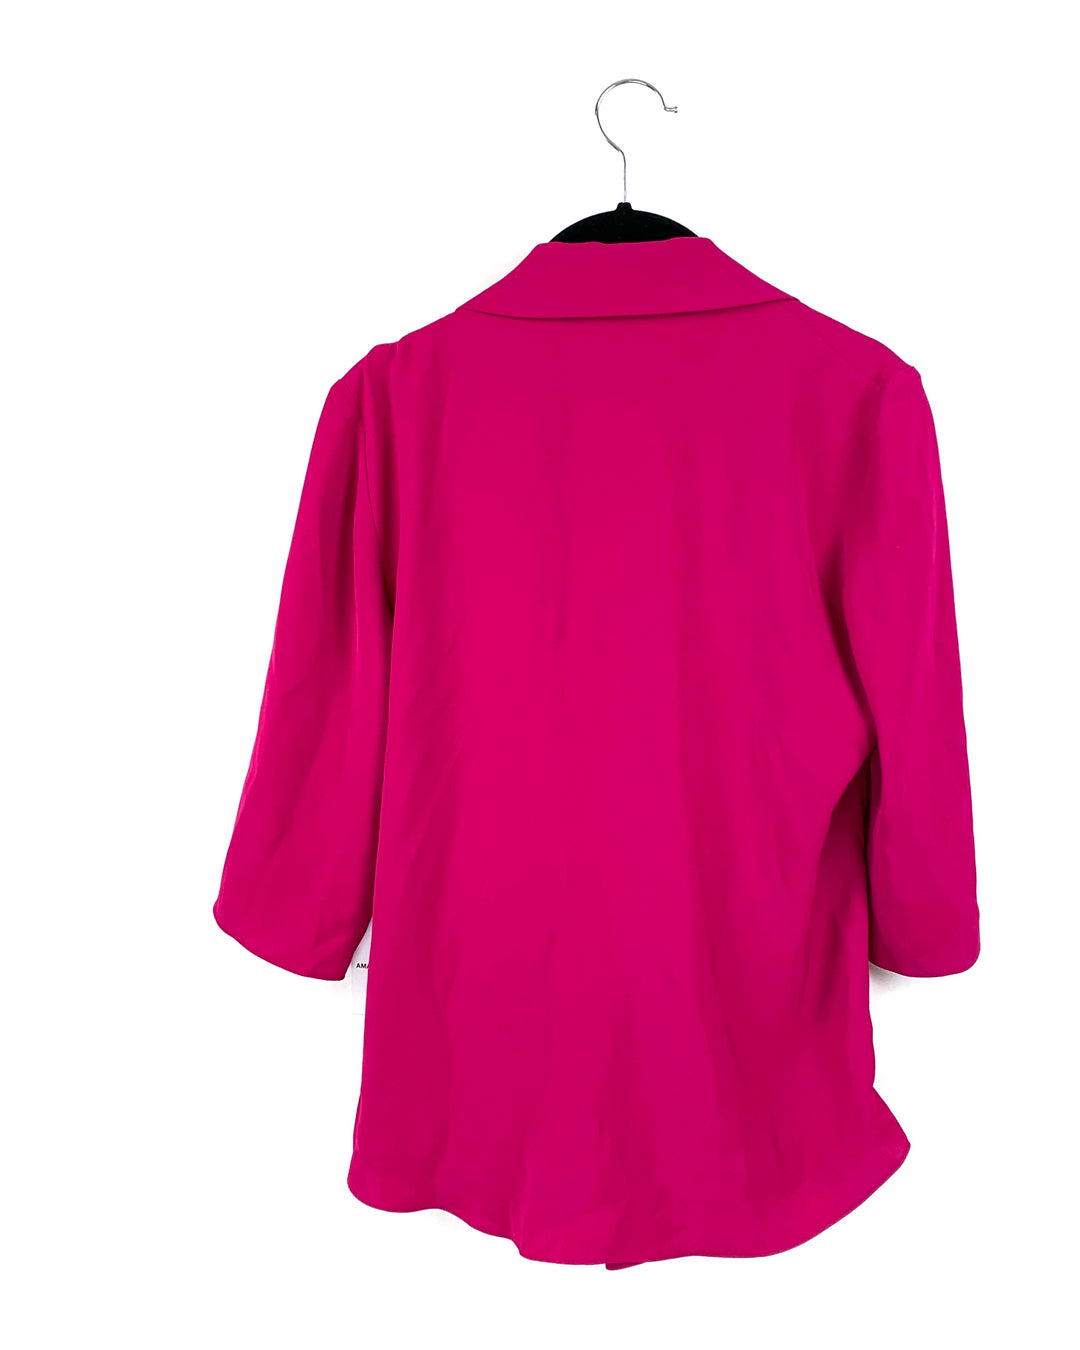 Magenta Collared Blouse - Small